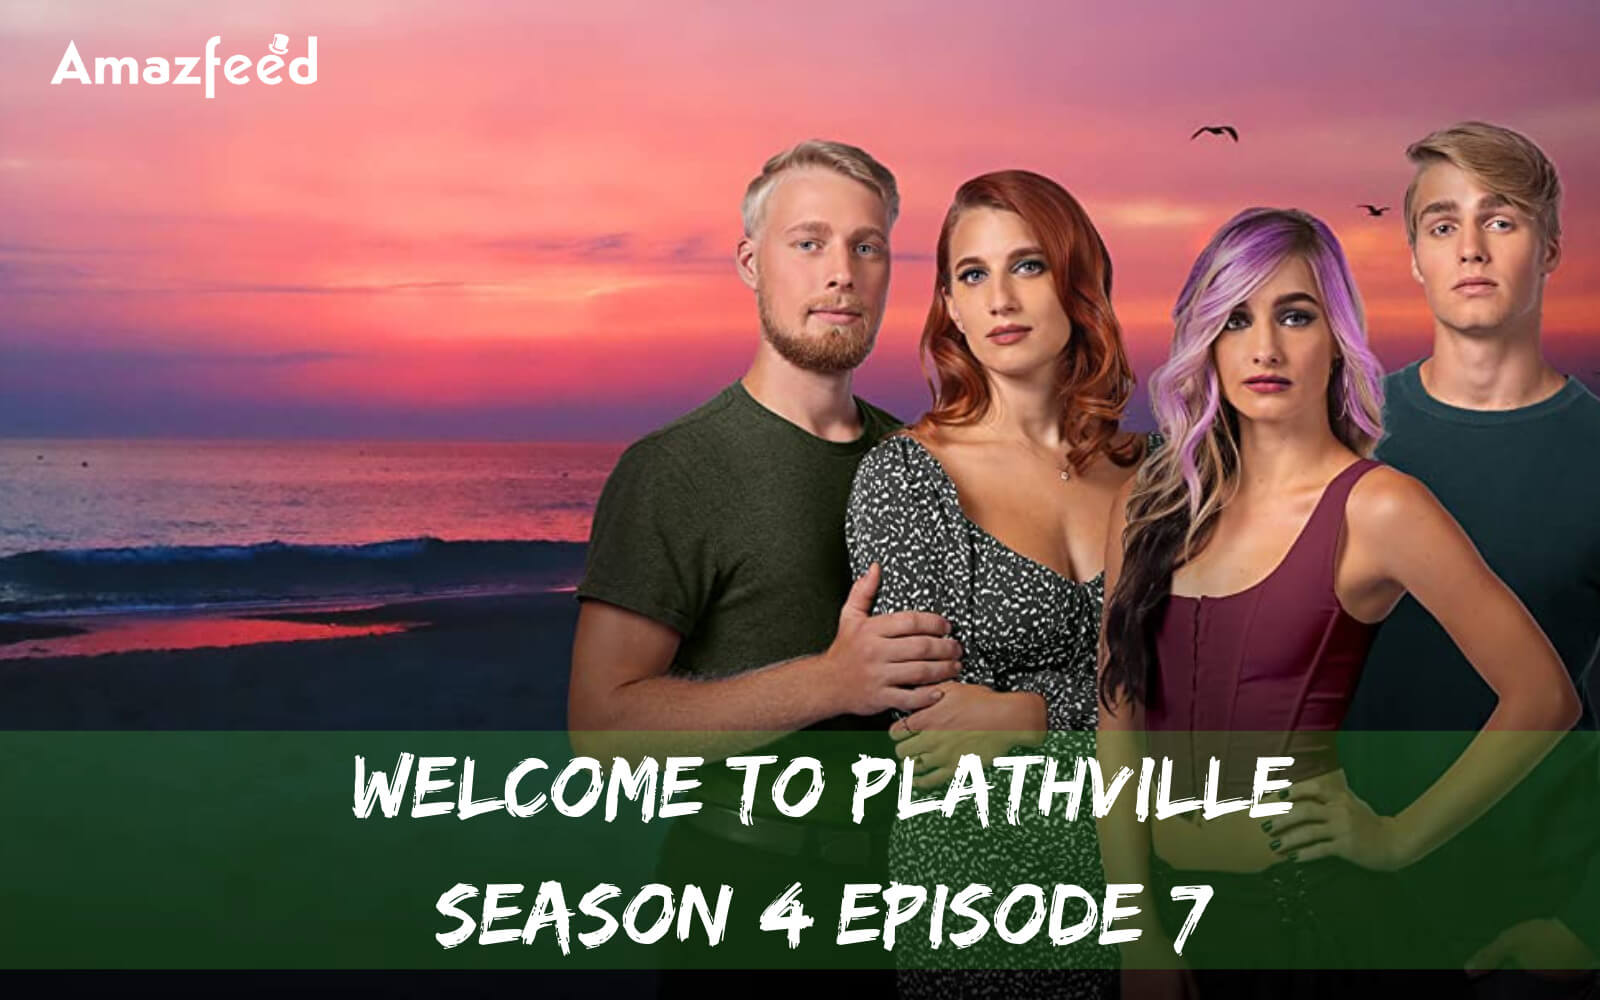 Welcome to Plathville season 4 Episode 7 release date